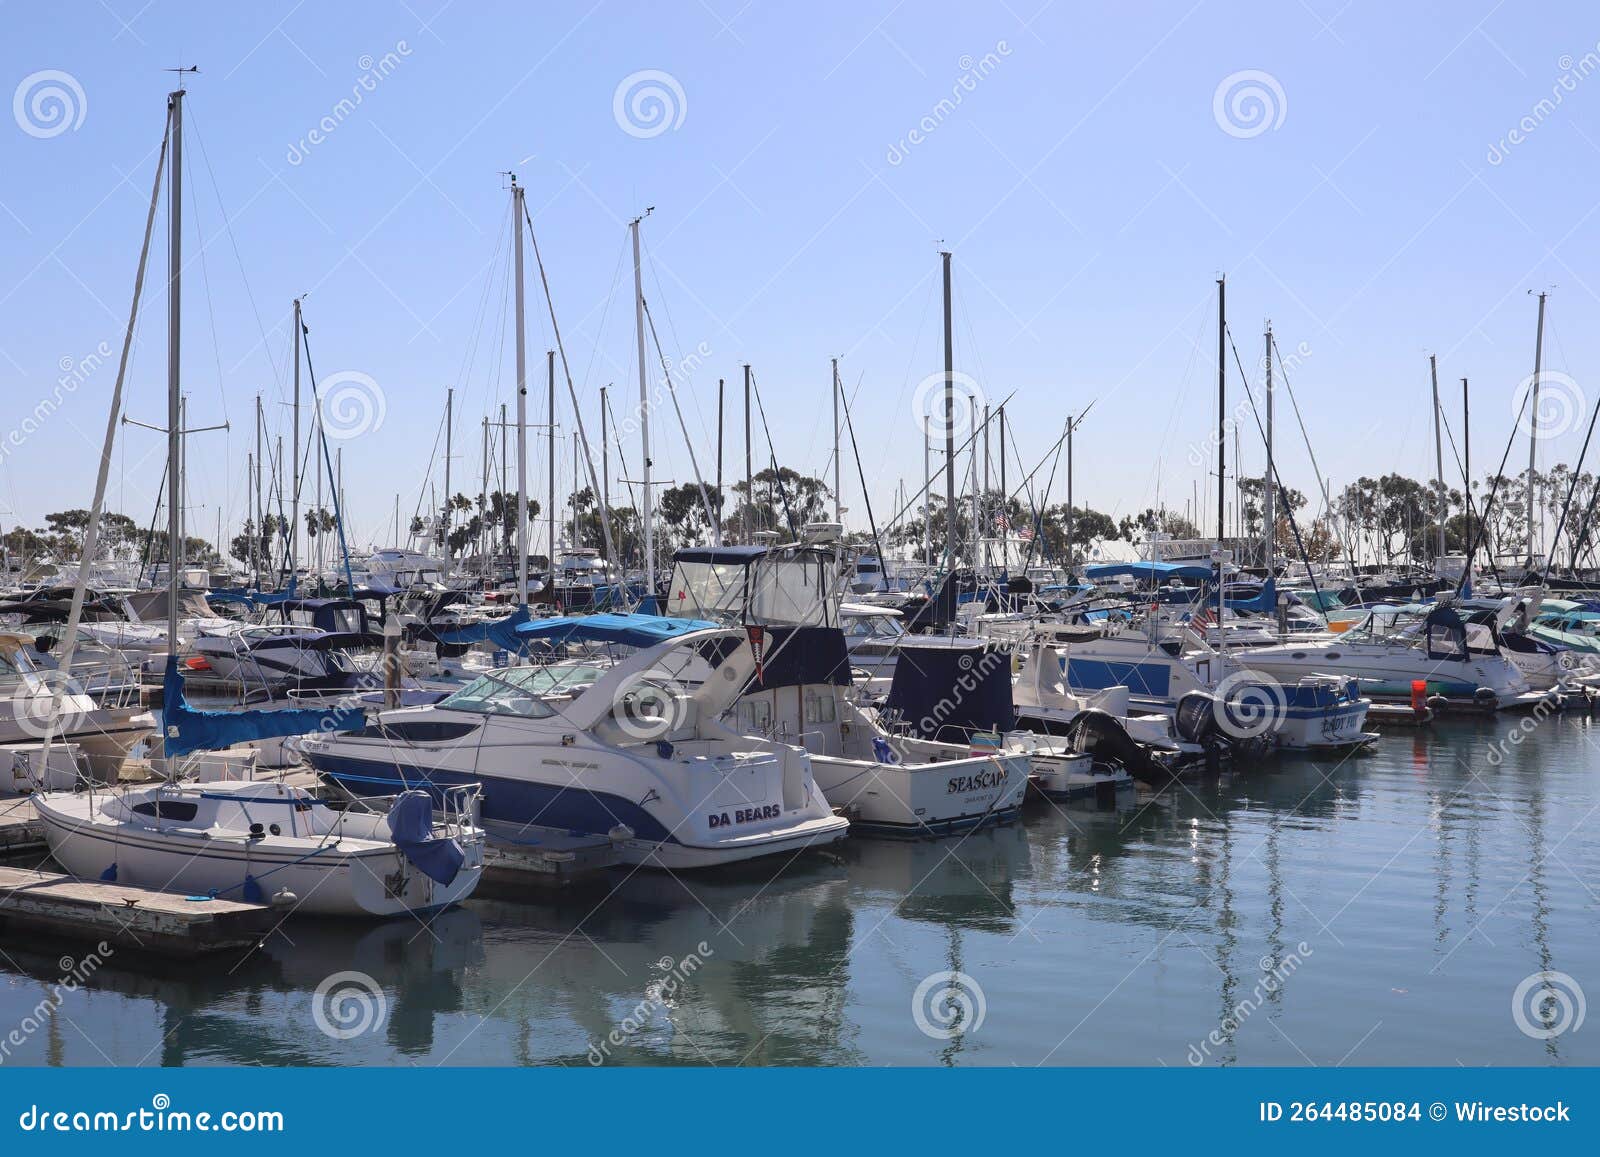 View of a Row of Boats and Yachts in Dana Point Harbor, California ...